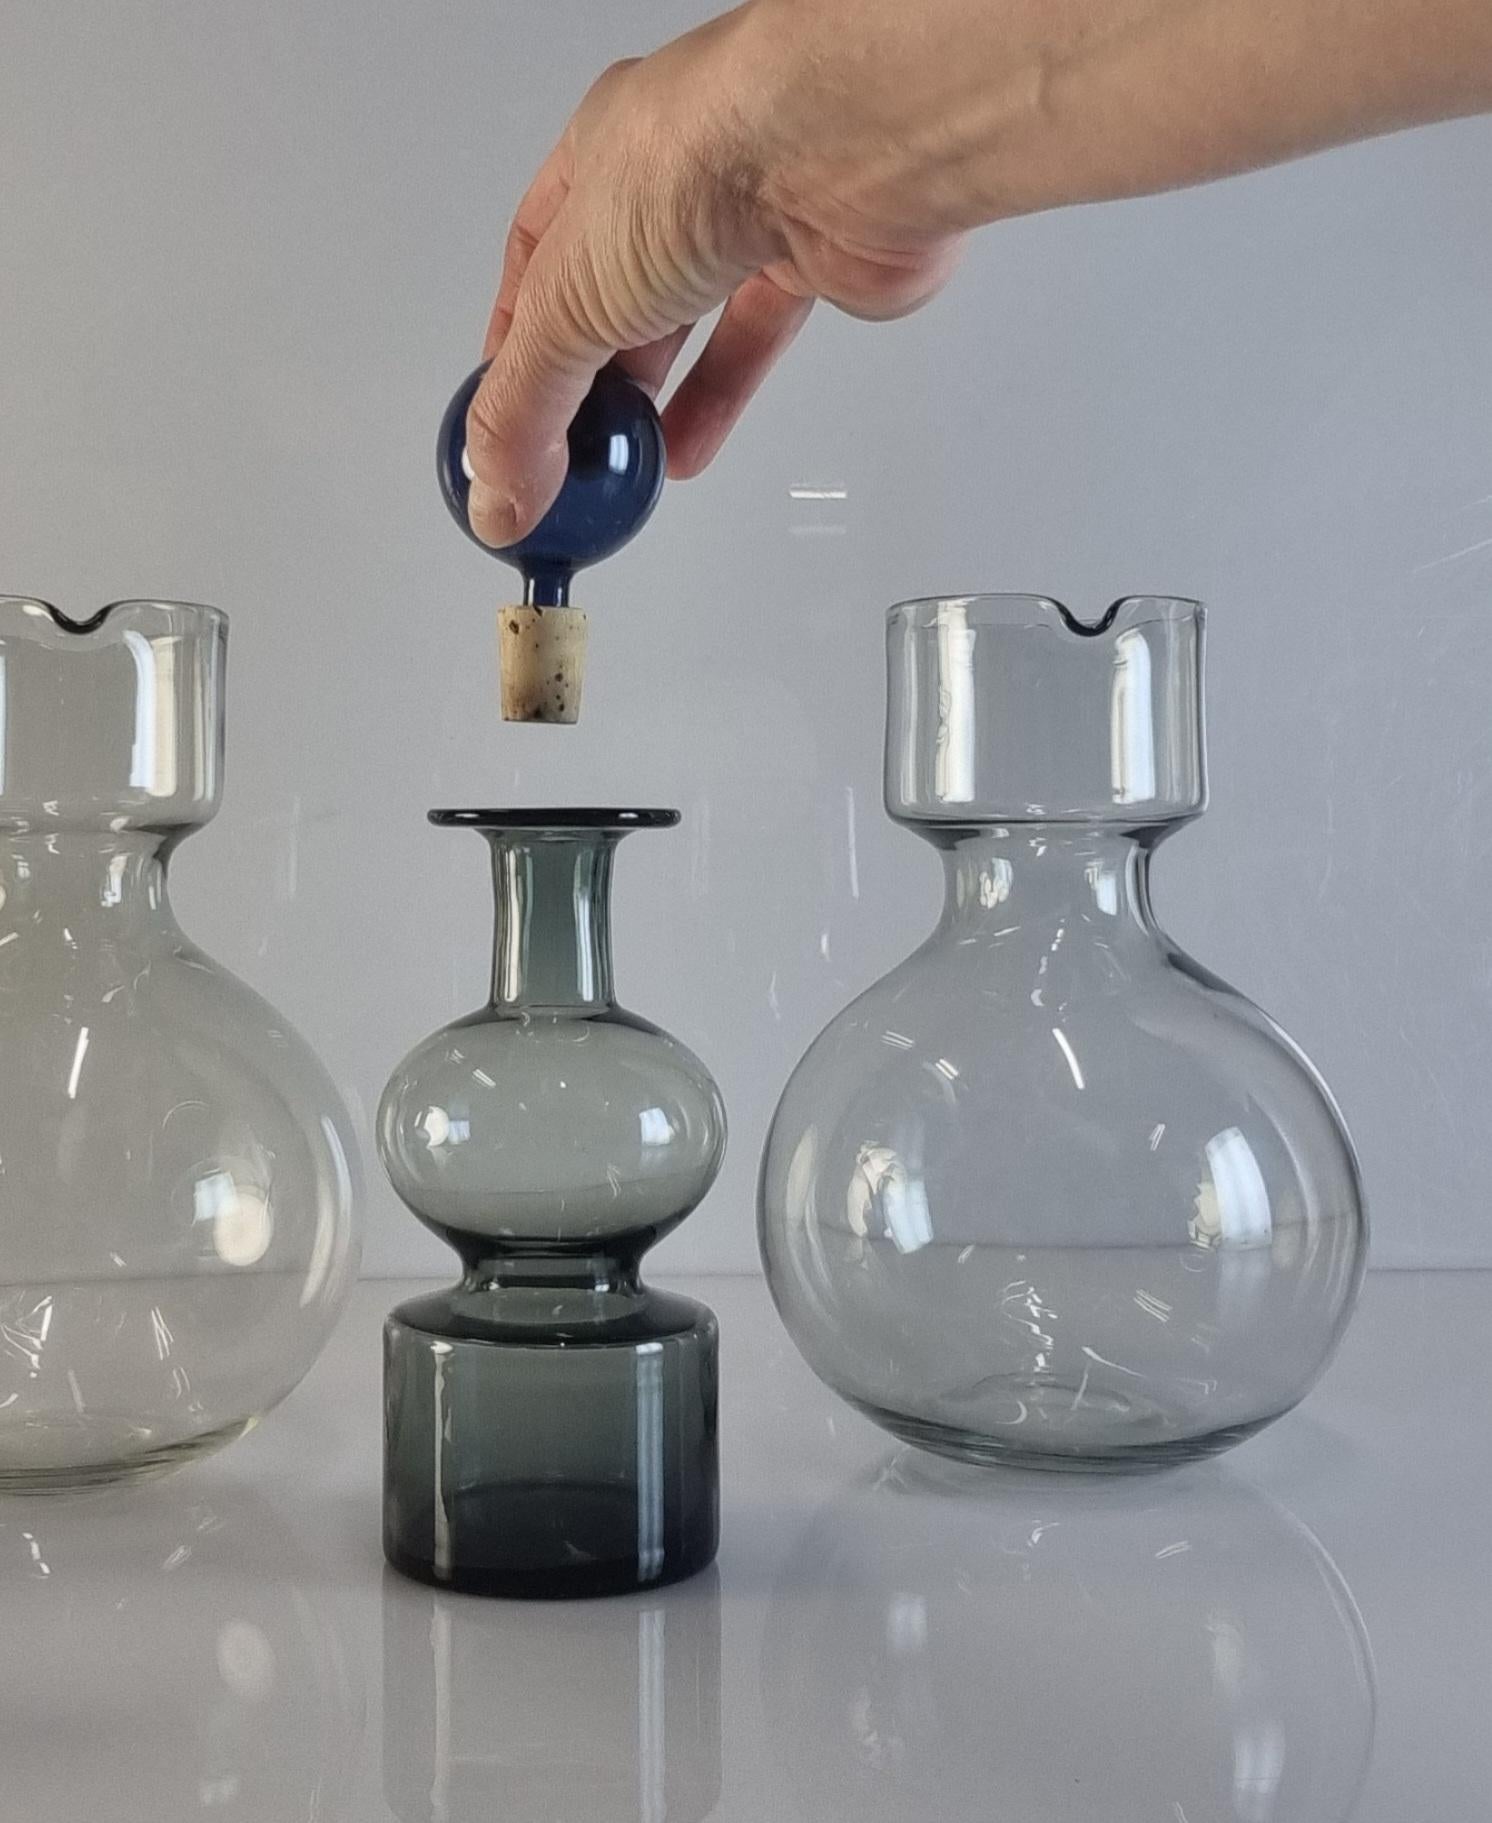 Minimalistic functional beauty.

Designed in the mid 50s, these delicate decorative decanters by Kaj Franck perfectly reflect his school of thought in bringing functionality through beauty to every day items while emphasising minimalism and